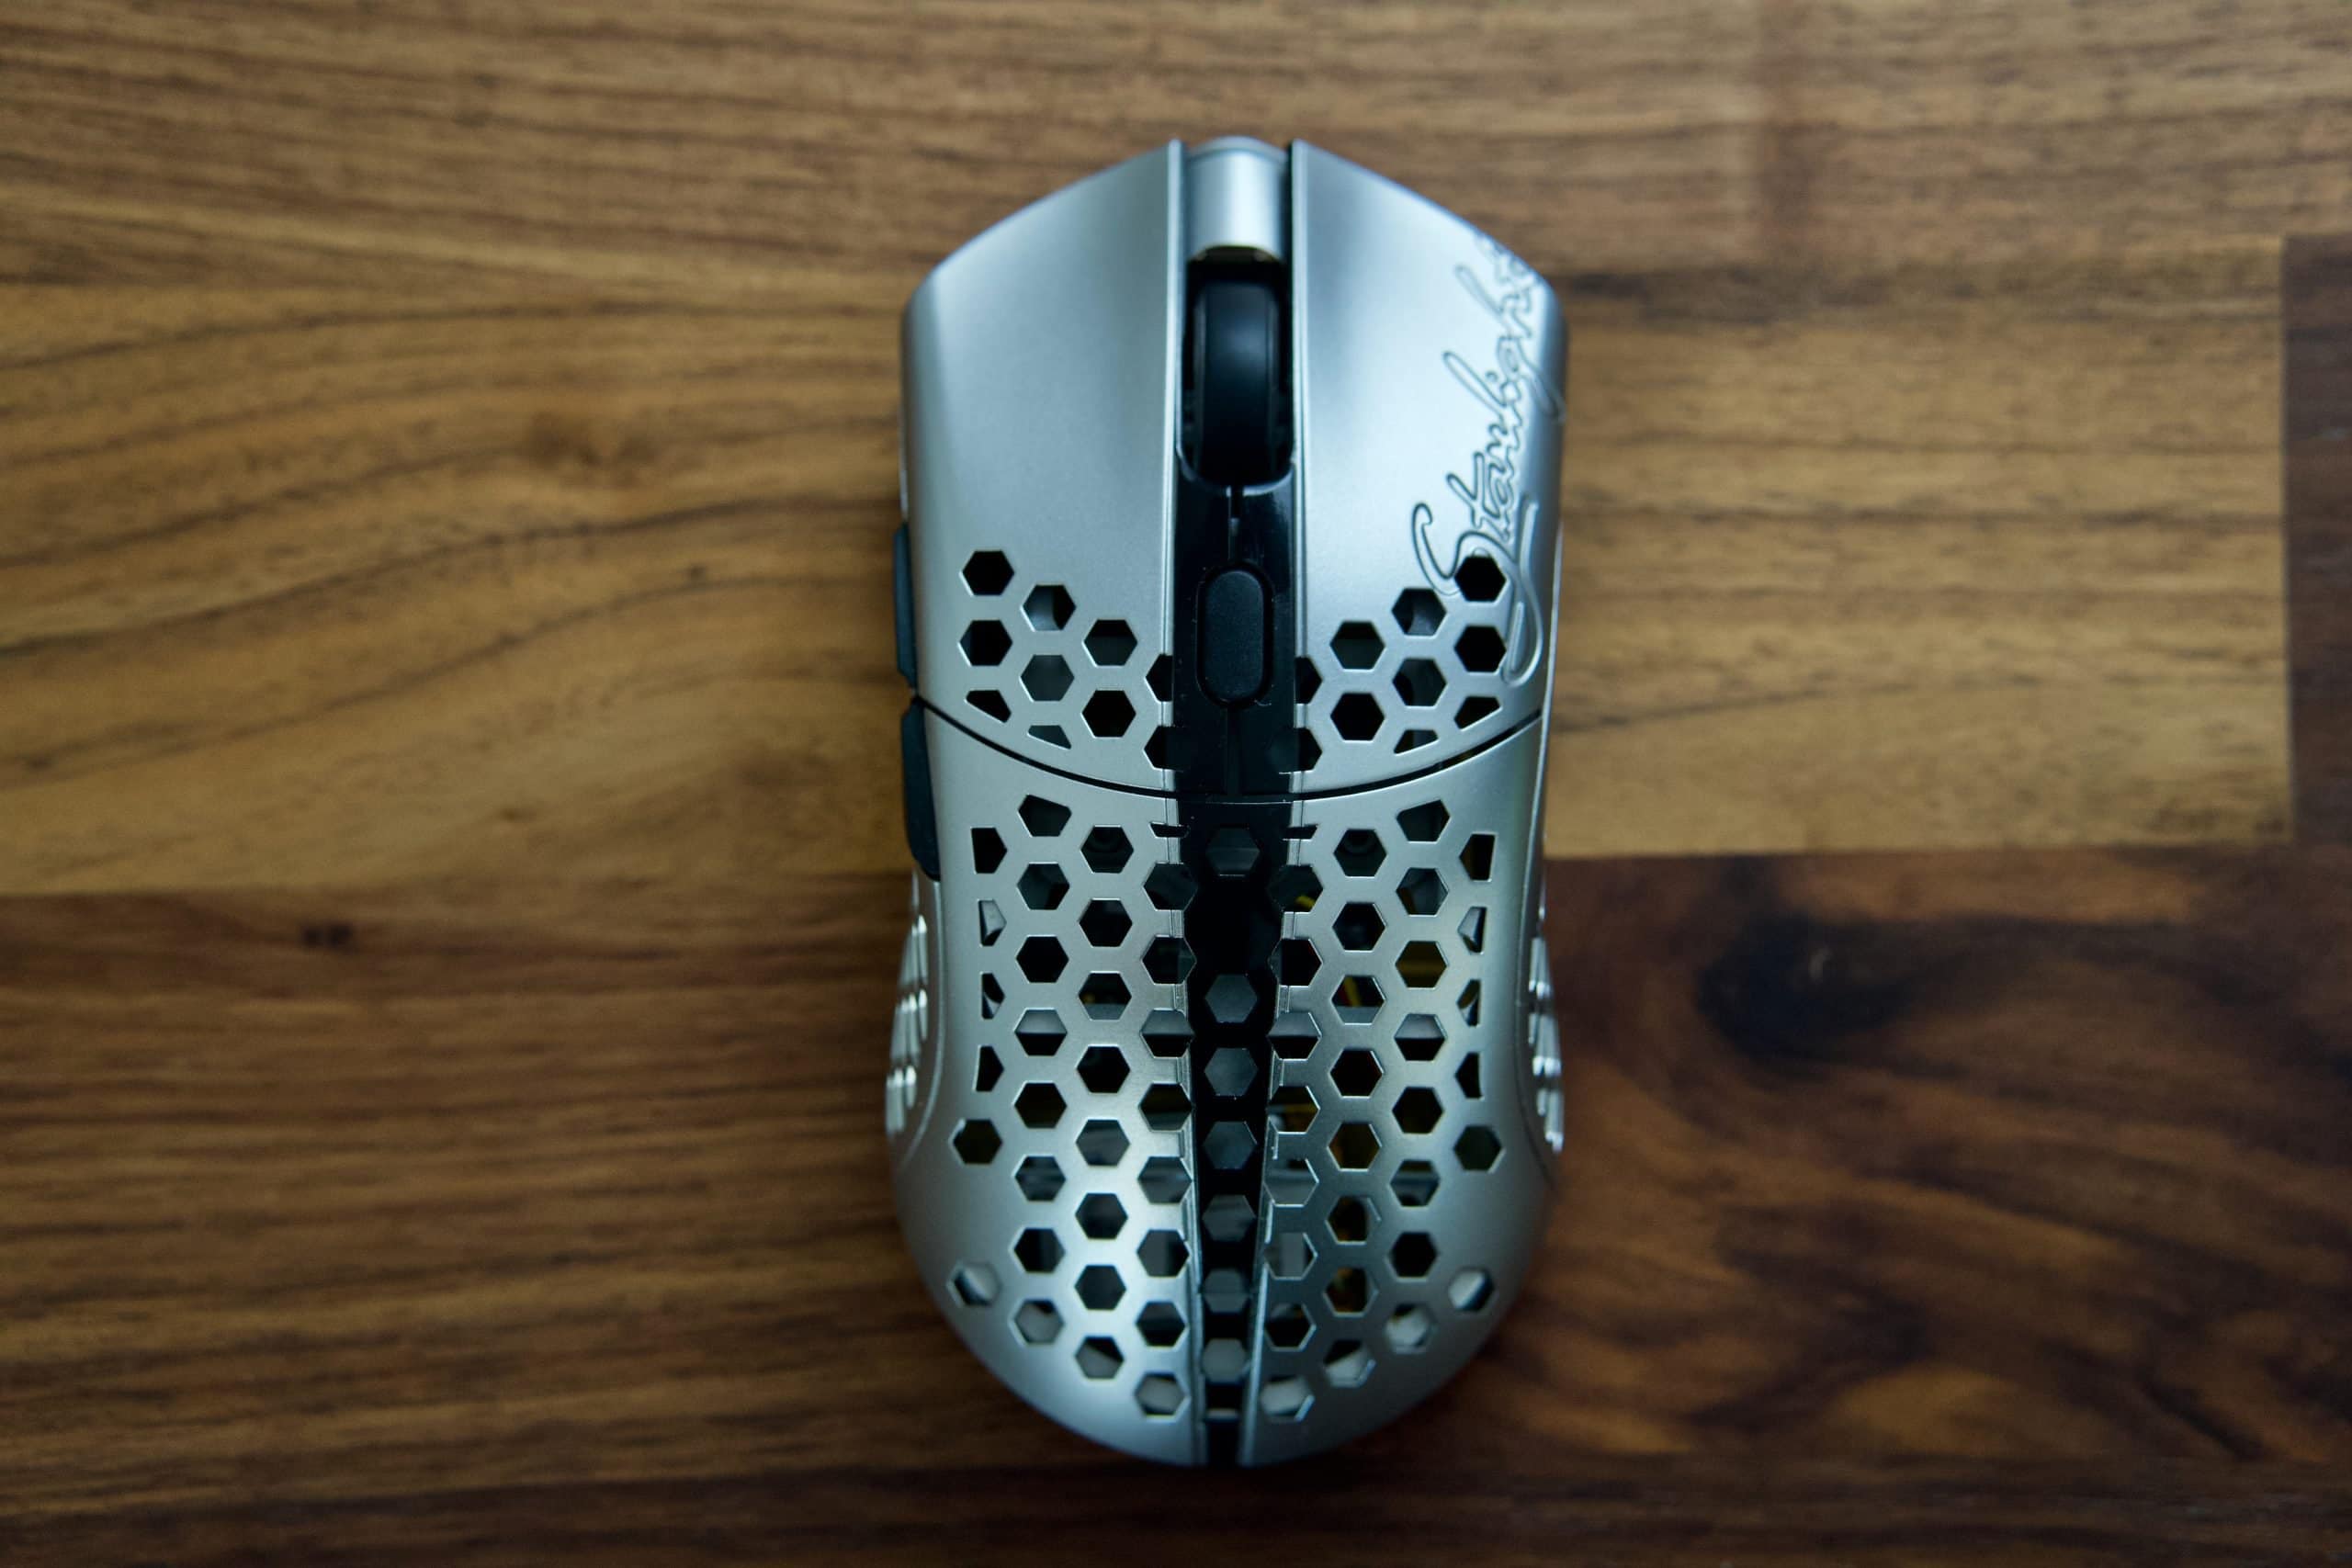 Finalmouse Starlight Pro TenZ Review